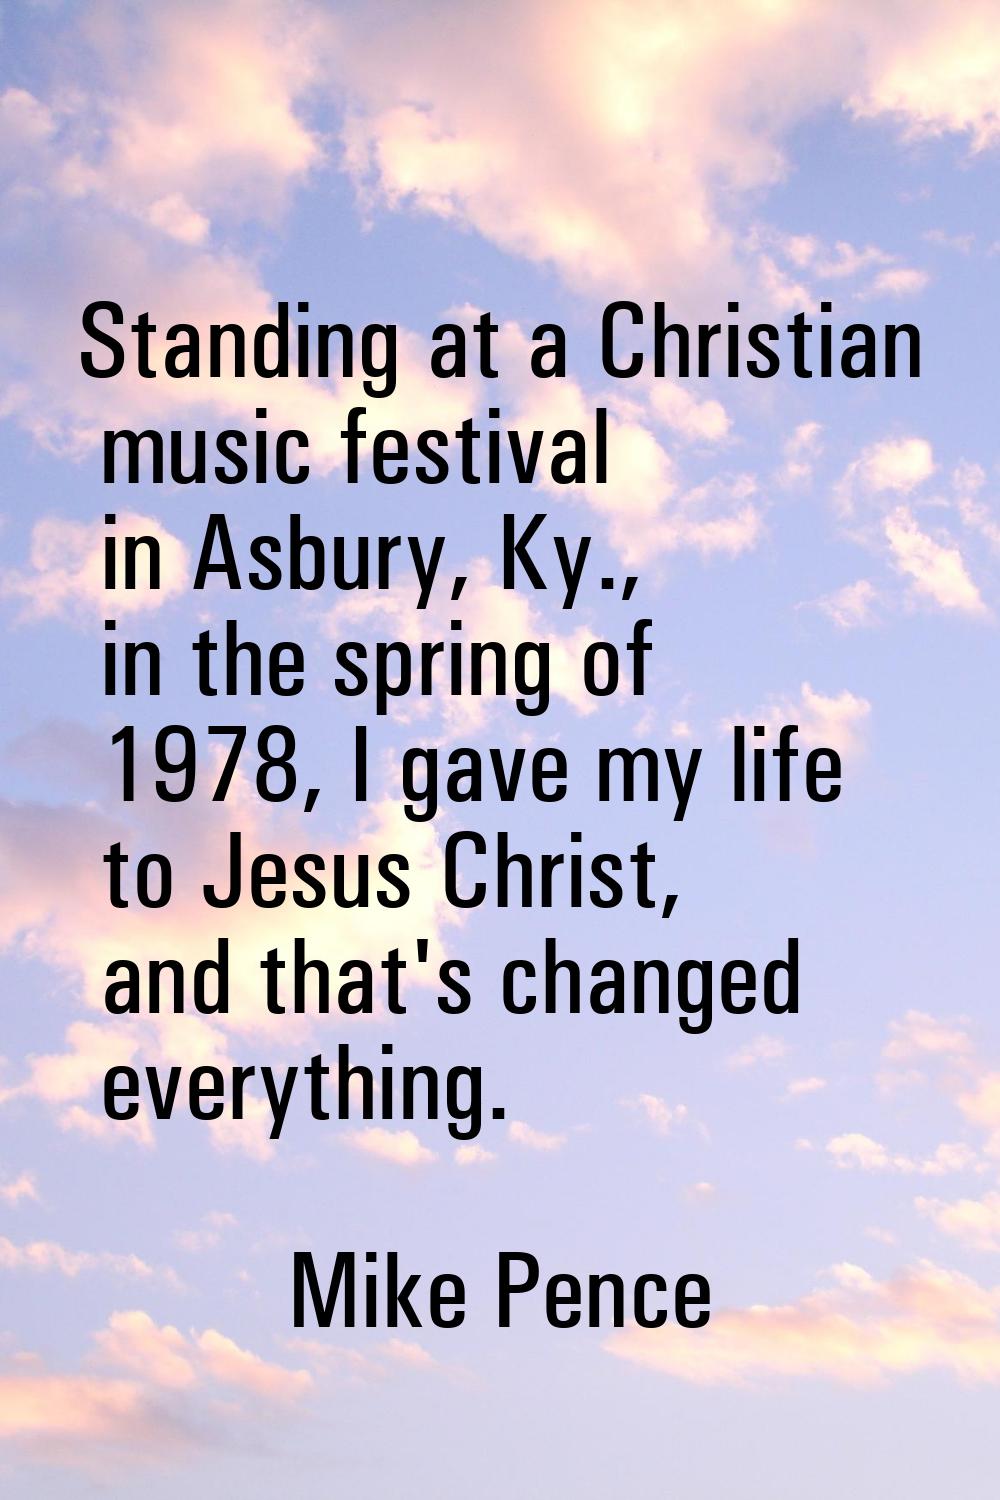 Standing at a Christian music festival in Asbury, Ky., in the spring of 1978, I gave my life to Jes